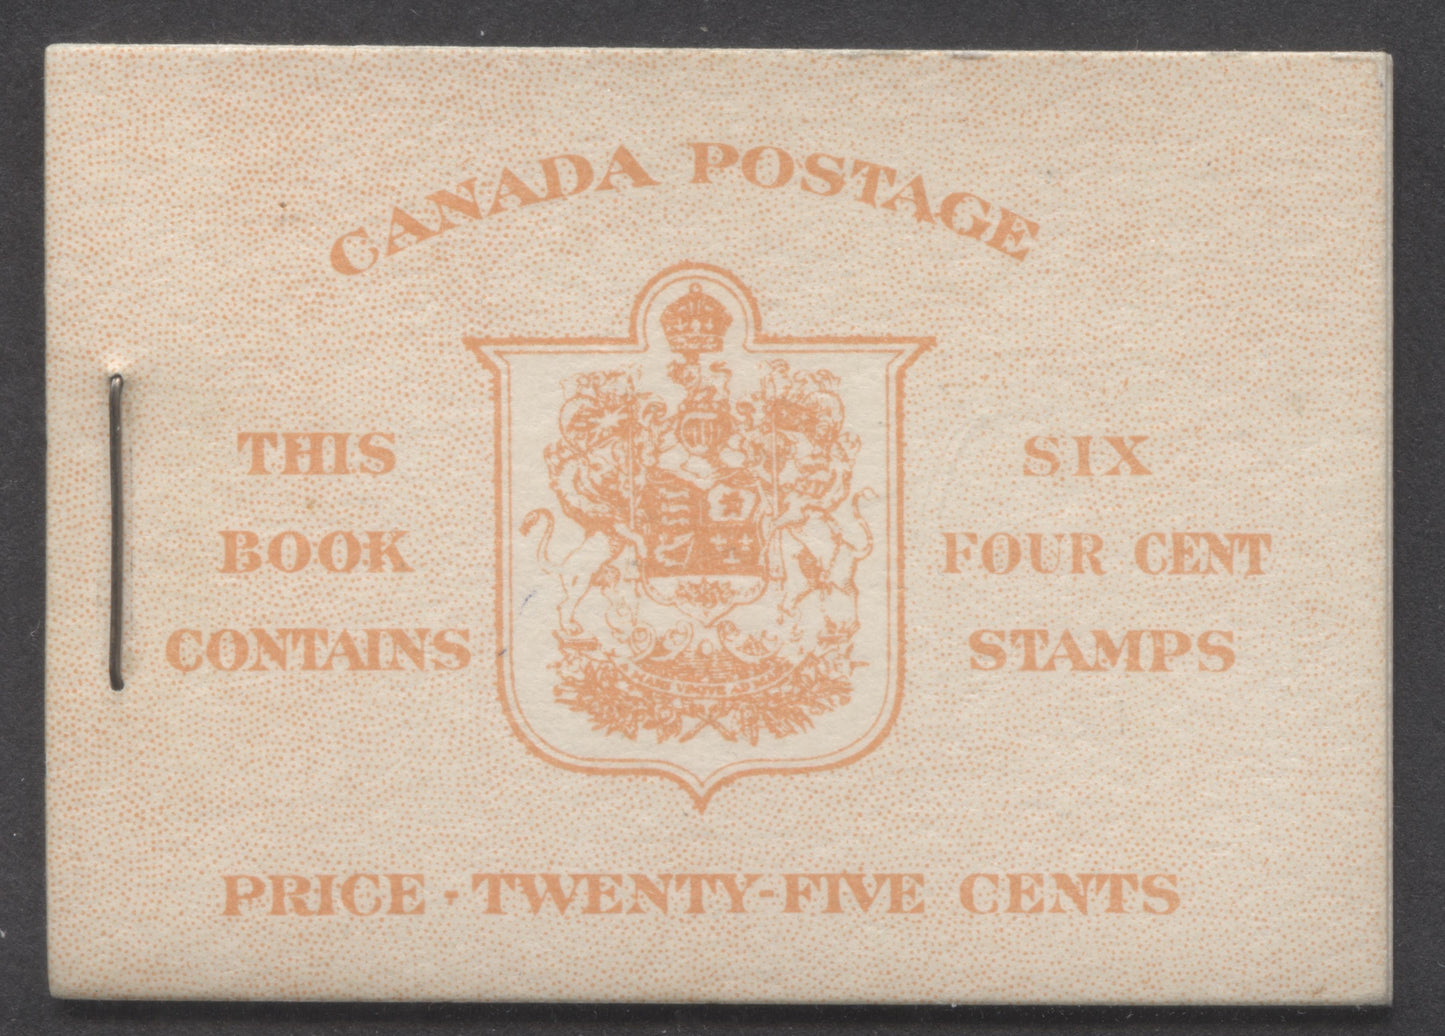 Lot 89 Canada #BK41aE 1949-1951 KGVI Issue, A Complete 25c English Booklet With 4c Dark Carmine, Pane Of 6. Front Cover IIi, Back Cover Caiii, Type I Cover, Very Pale Orange Front Cover, 7c & 5c Rates, 'Postmaster', 450,000 Issued